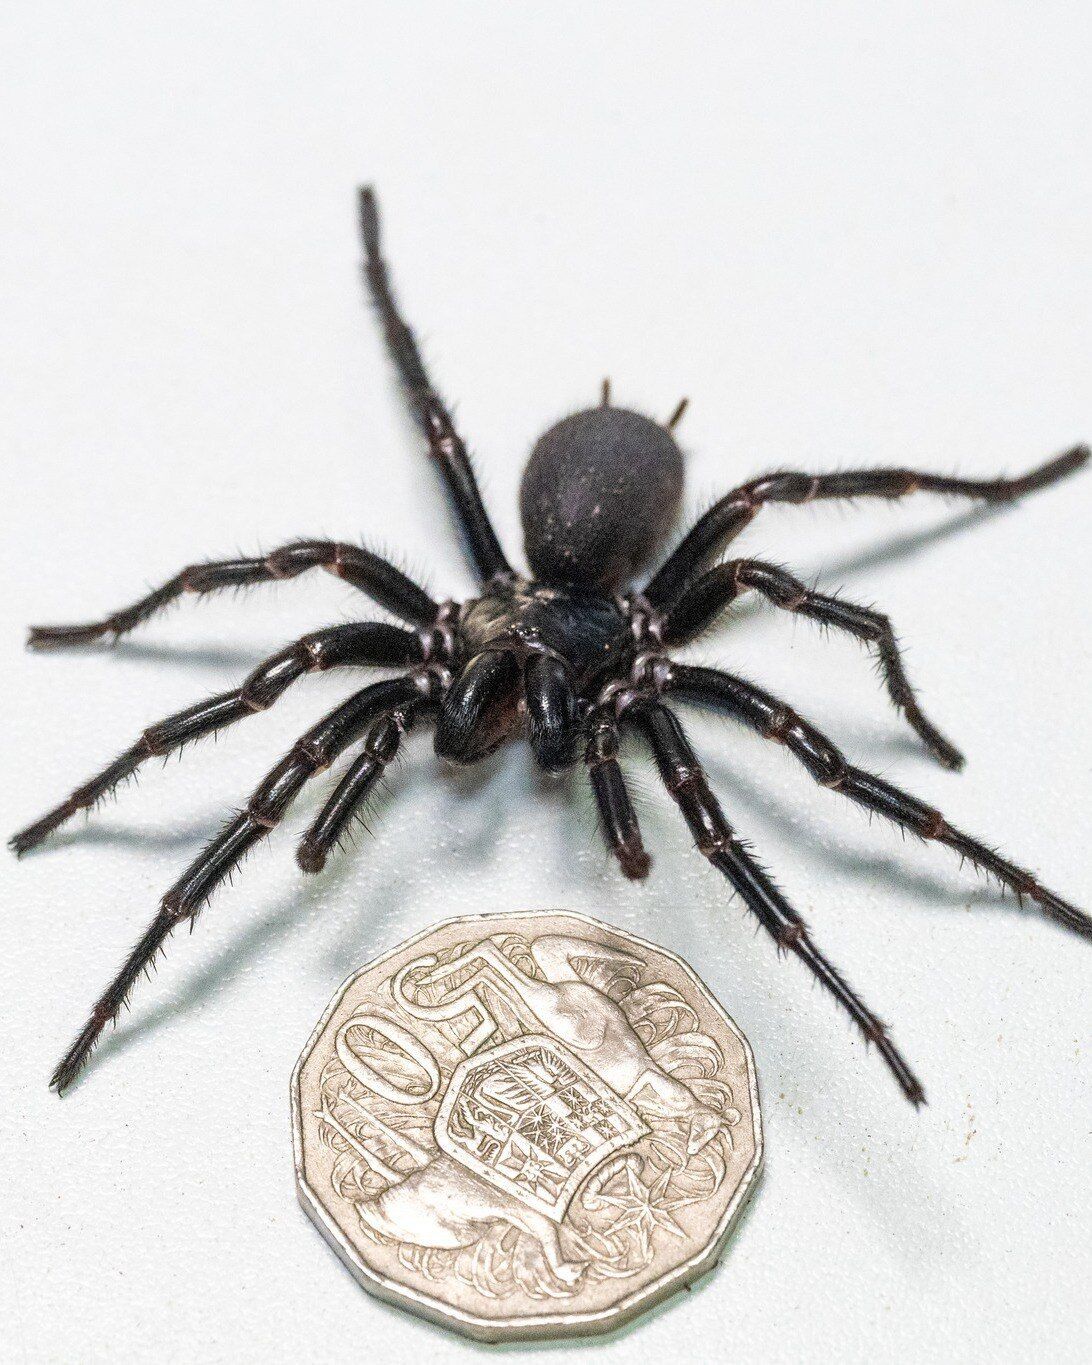 The largest male of one of the world's most poisonous spiders found in Australia: It will help with the vaccine. Photo